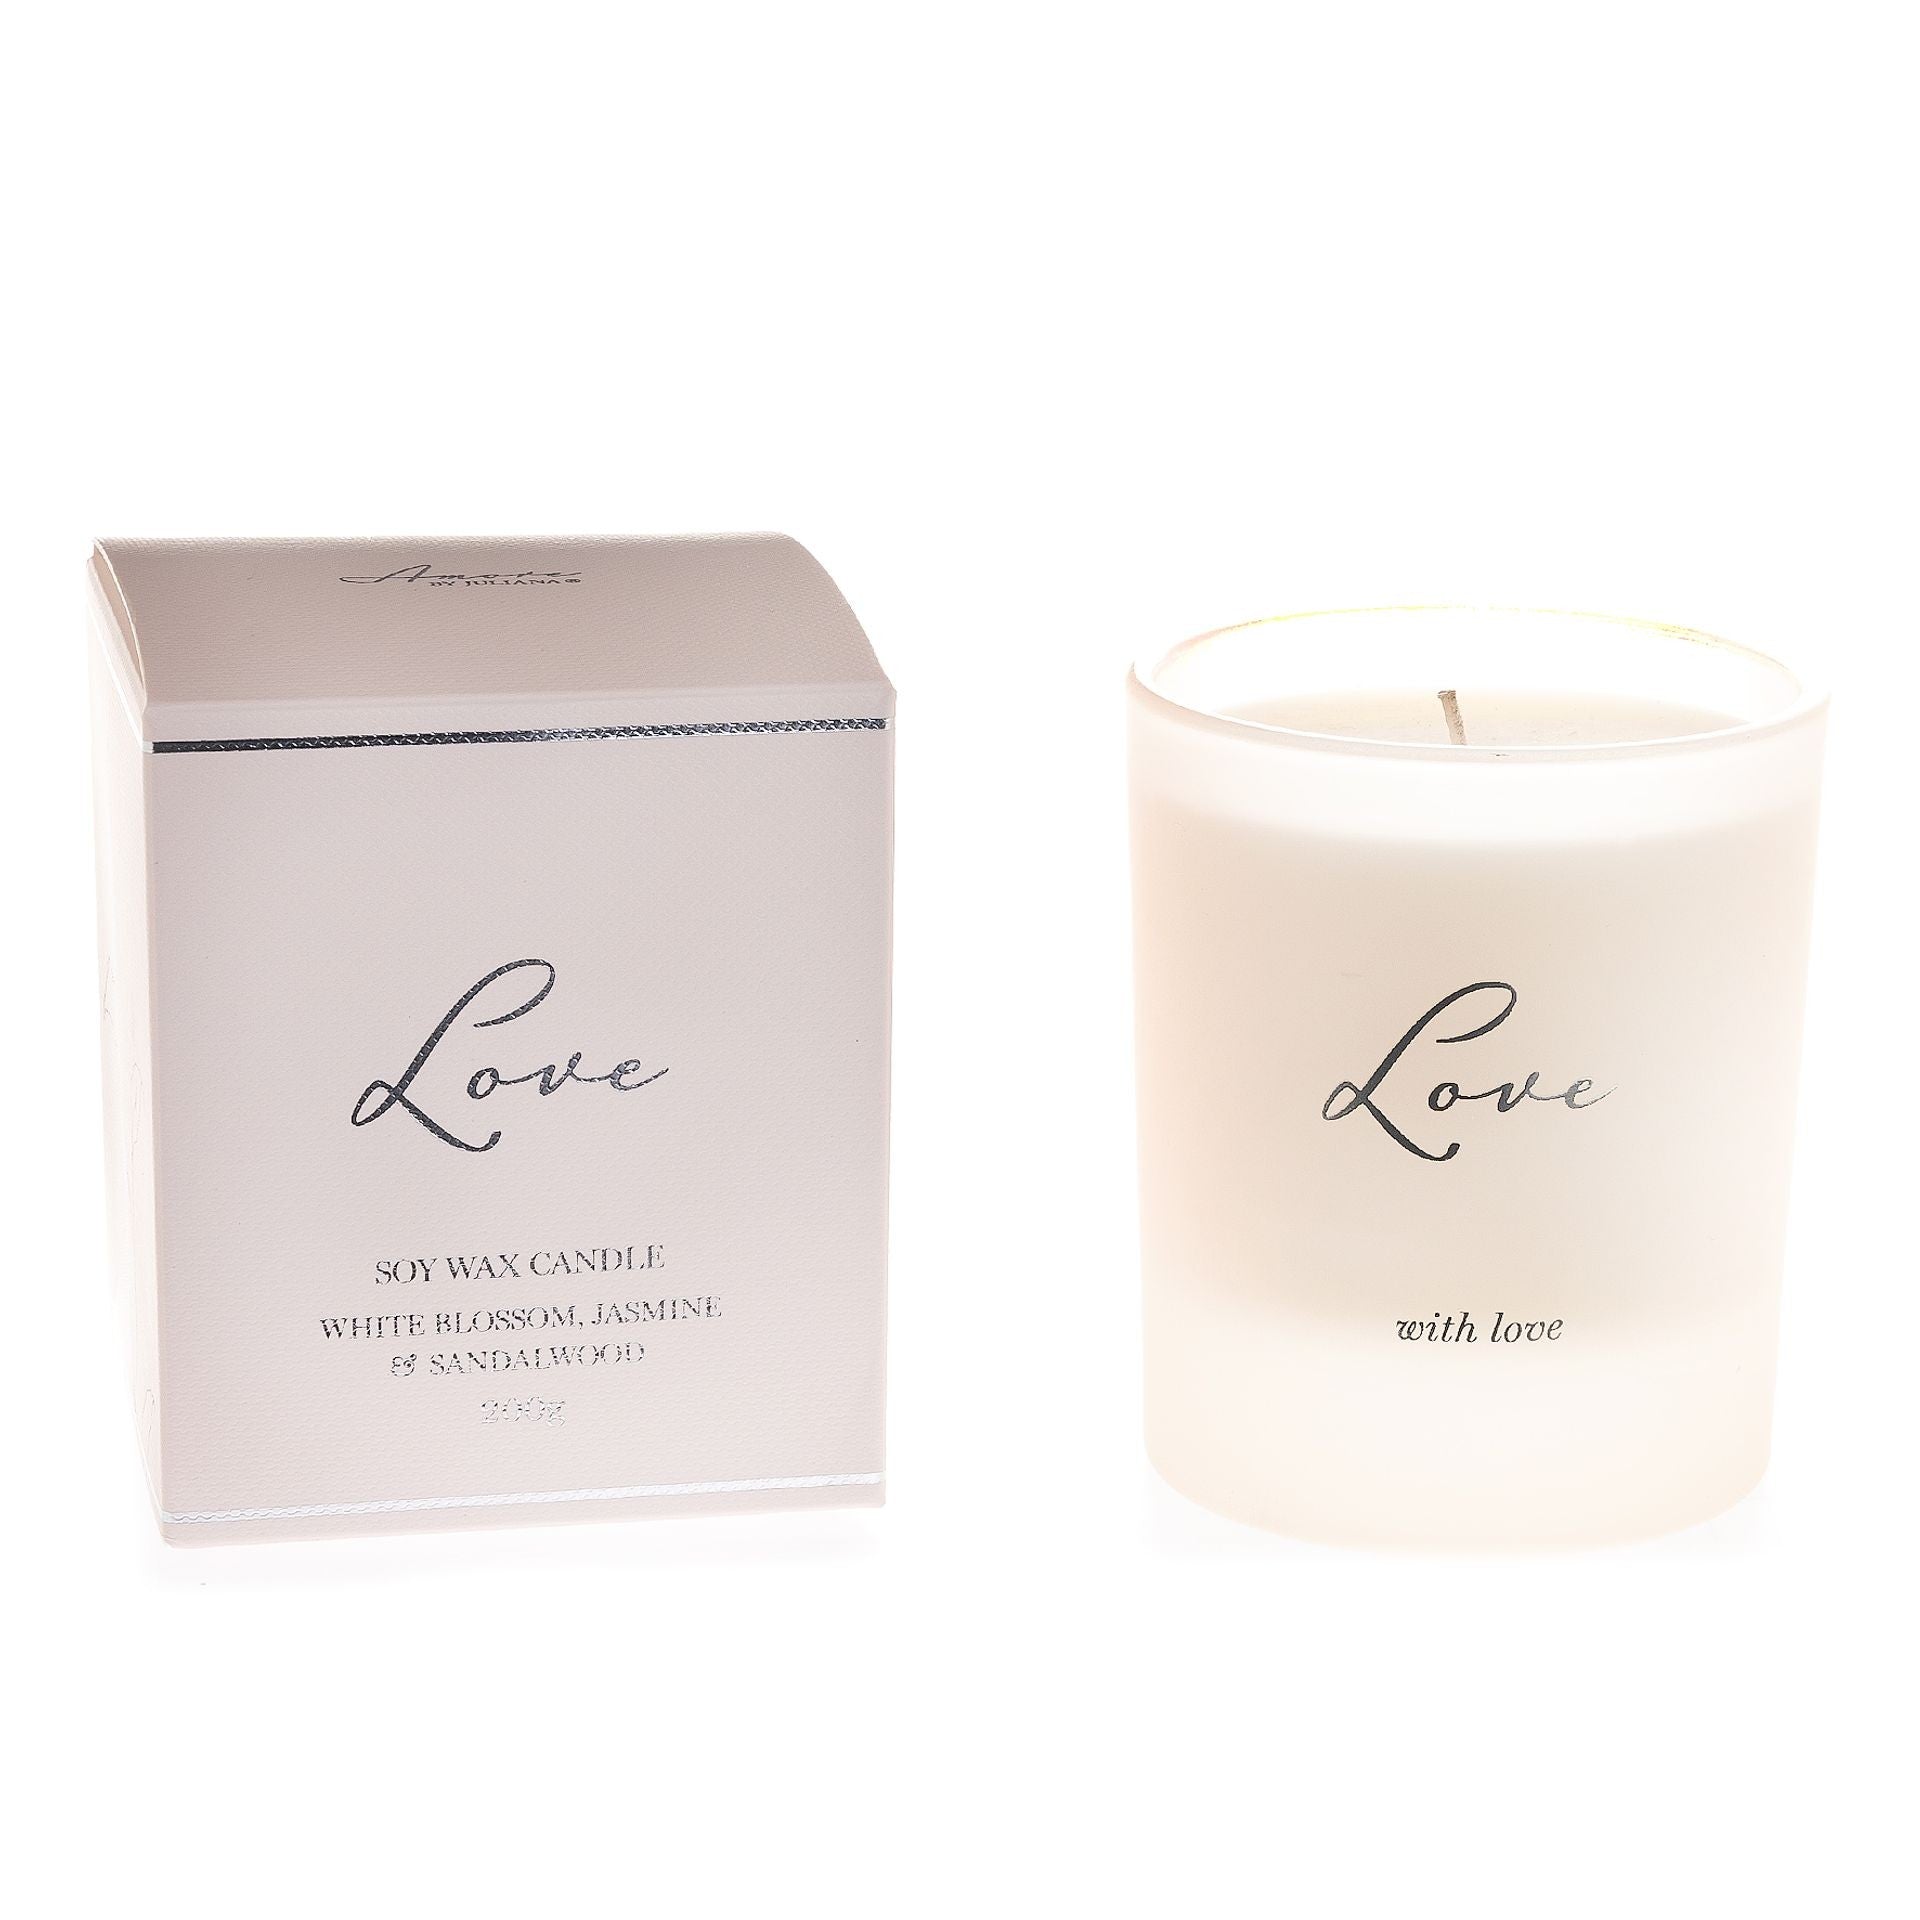 View Love Candle 200g information